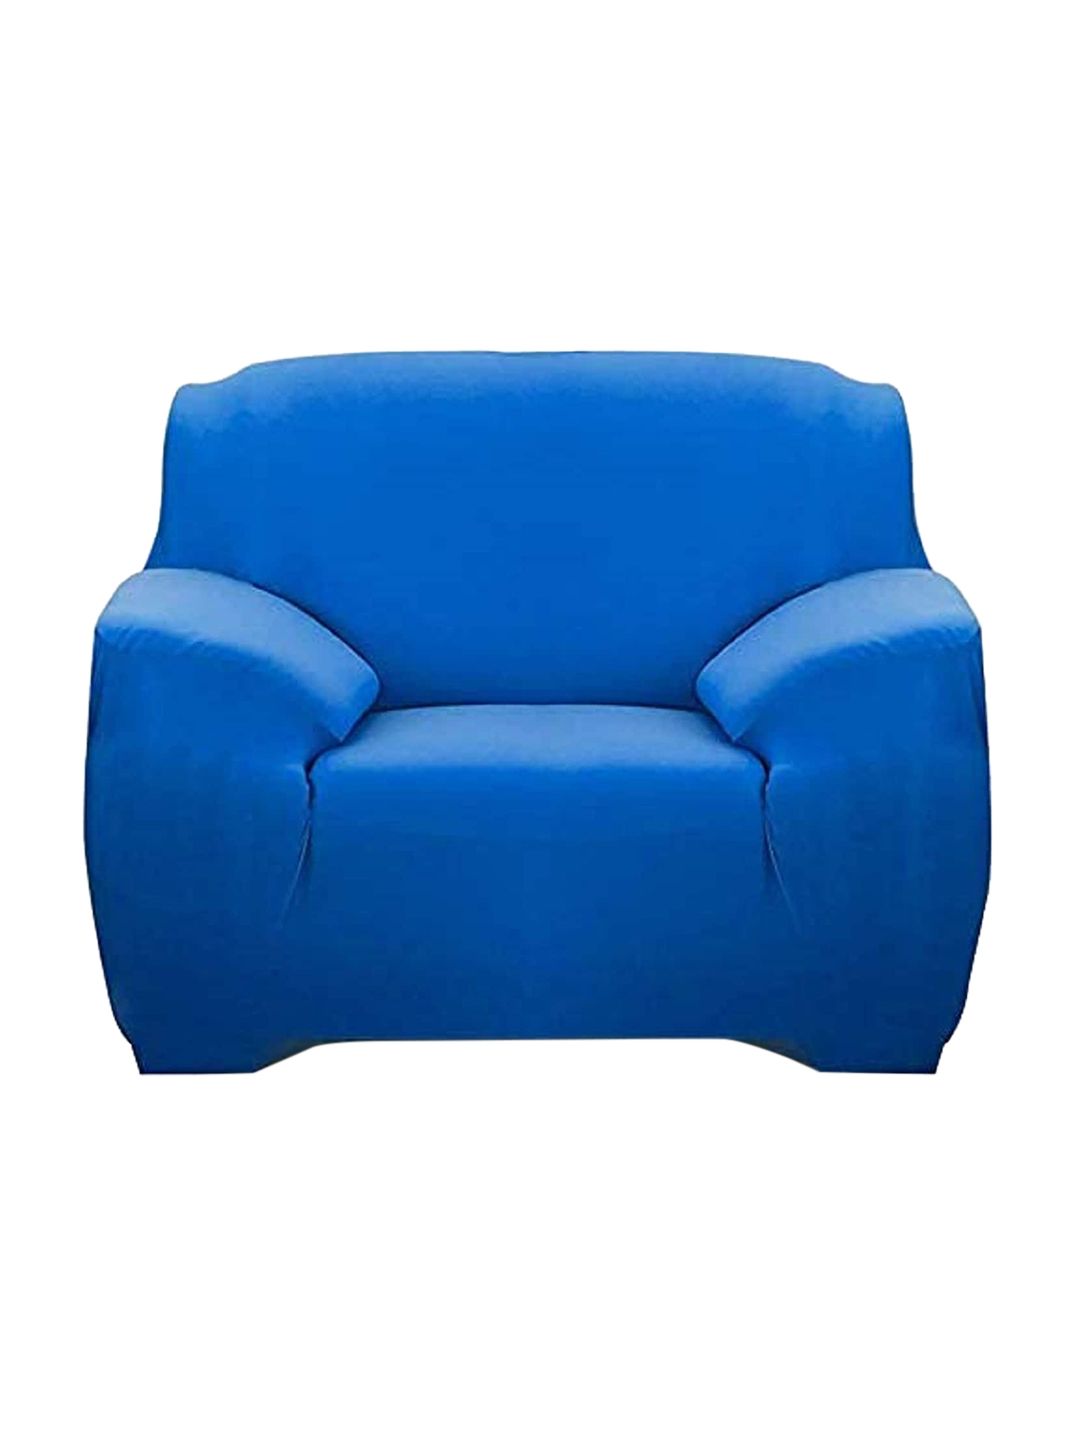 HOUSE OF QUIRK Blue Solid Polyester Sofa Covers Price in India